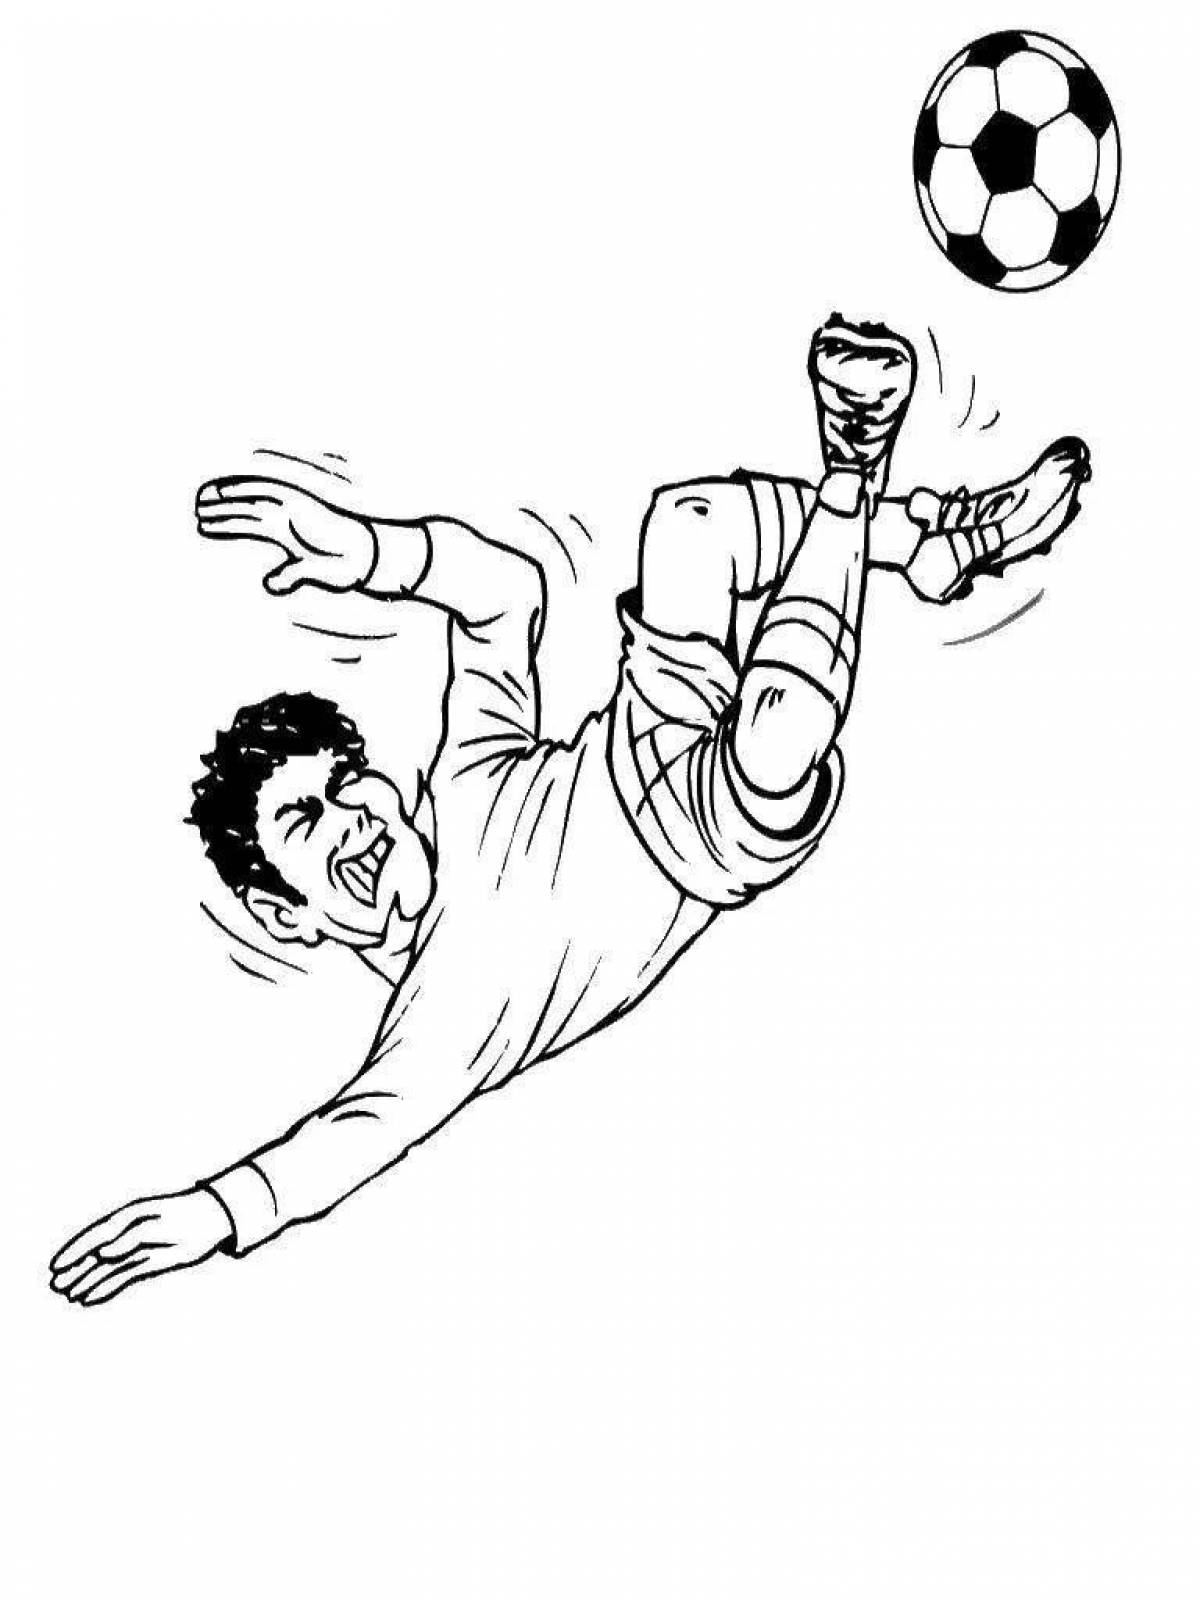 Animated pele football player coloring book